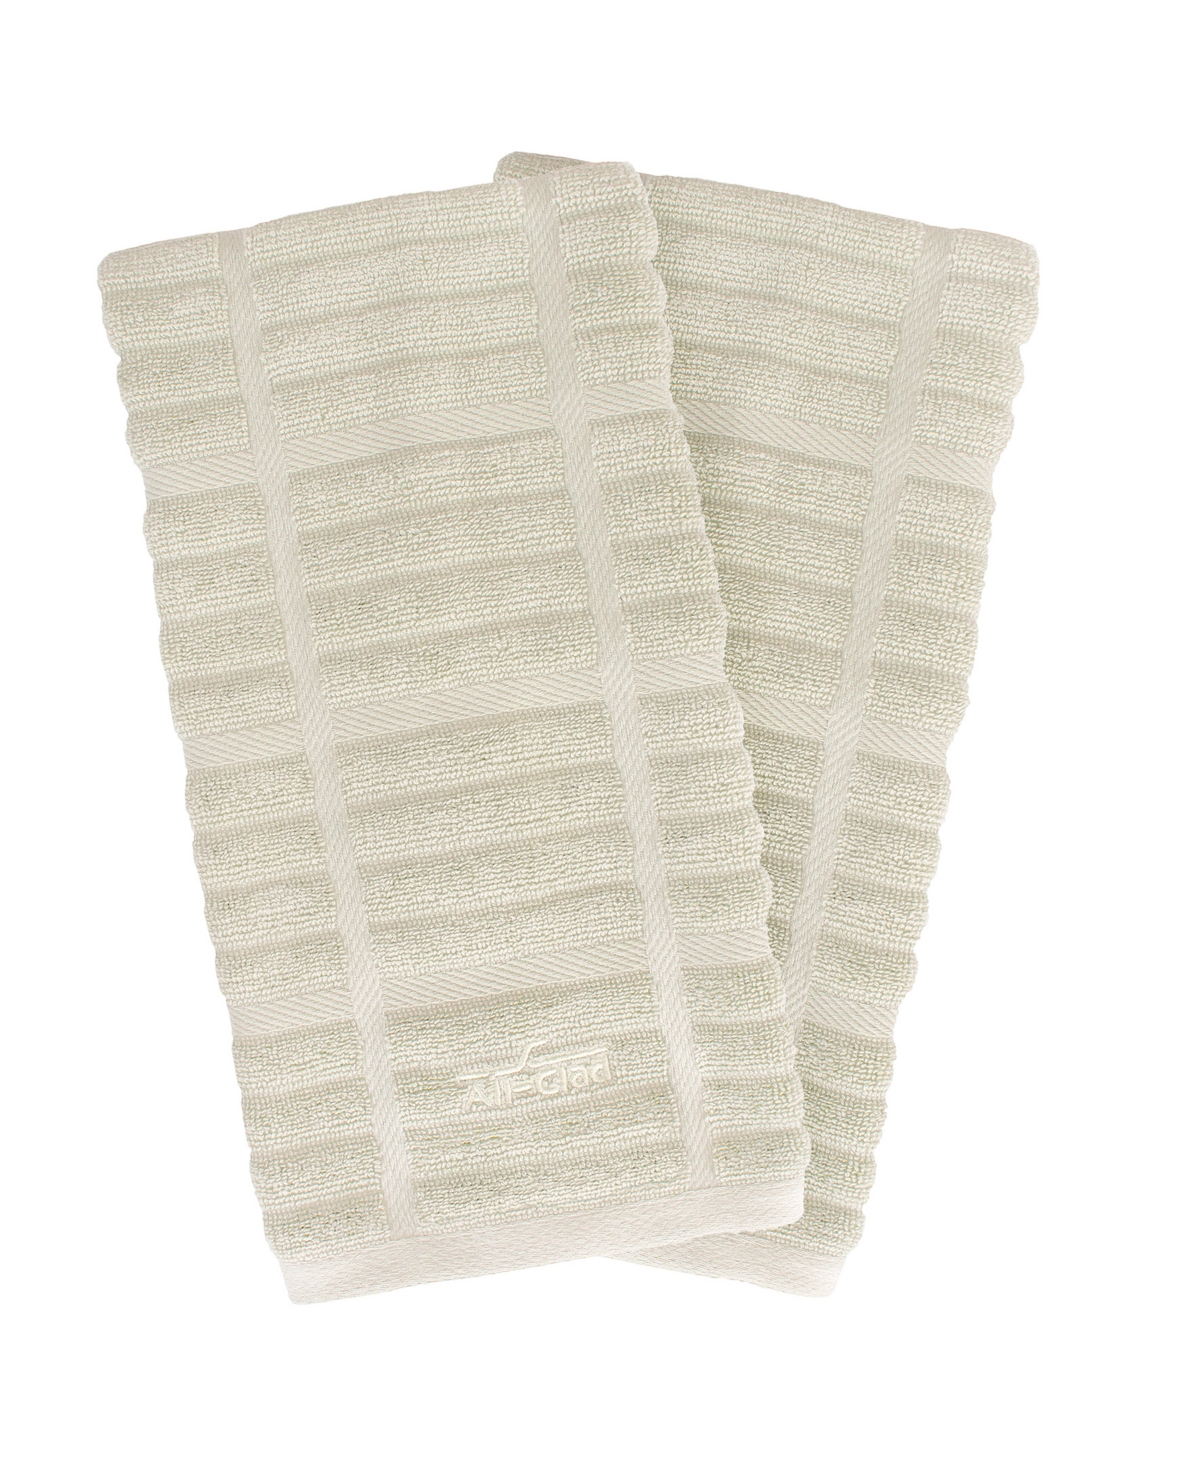 All-clad Solid Kitchen Towel Set Of 2 In Almond